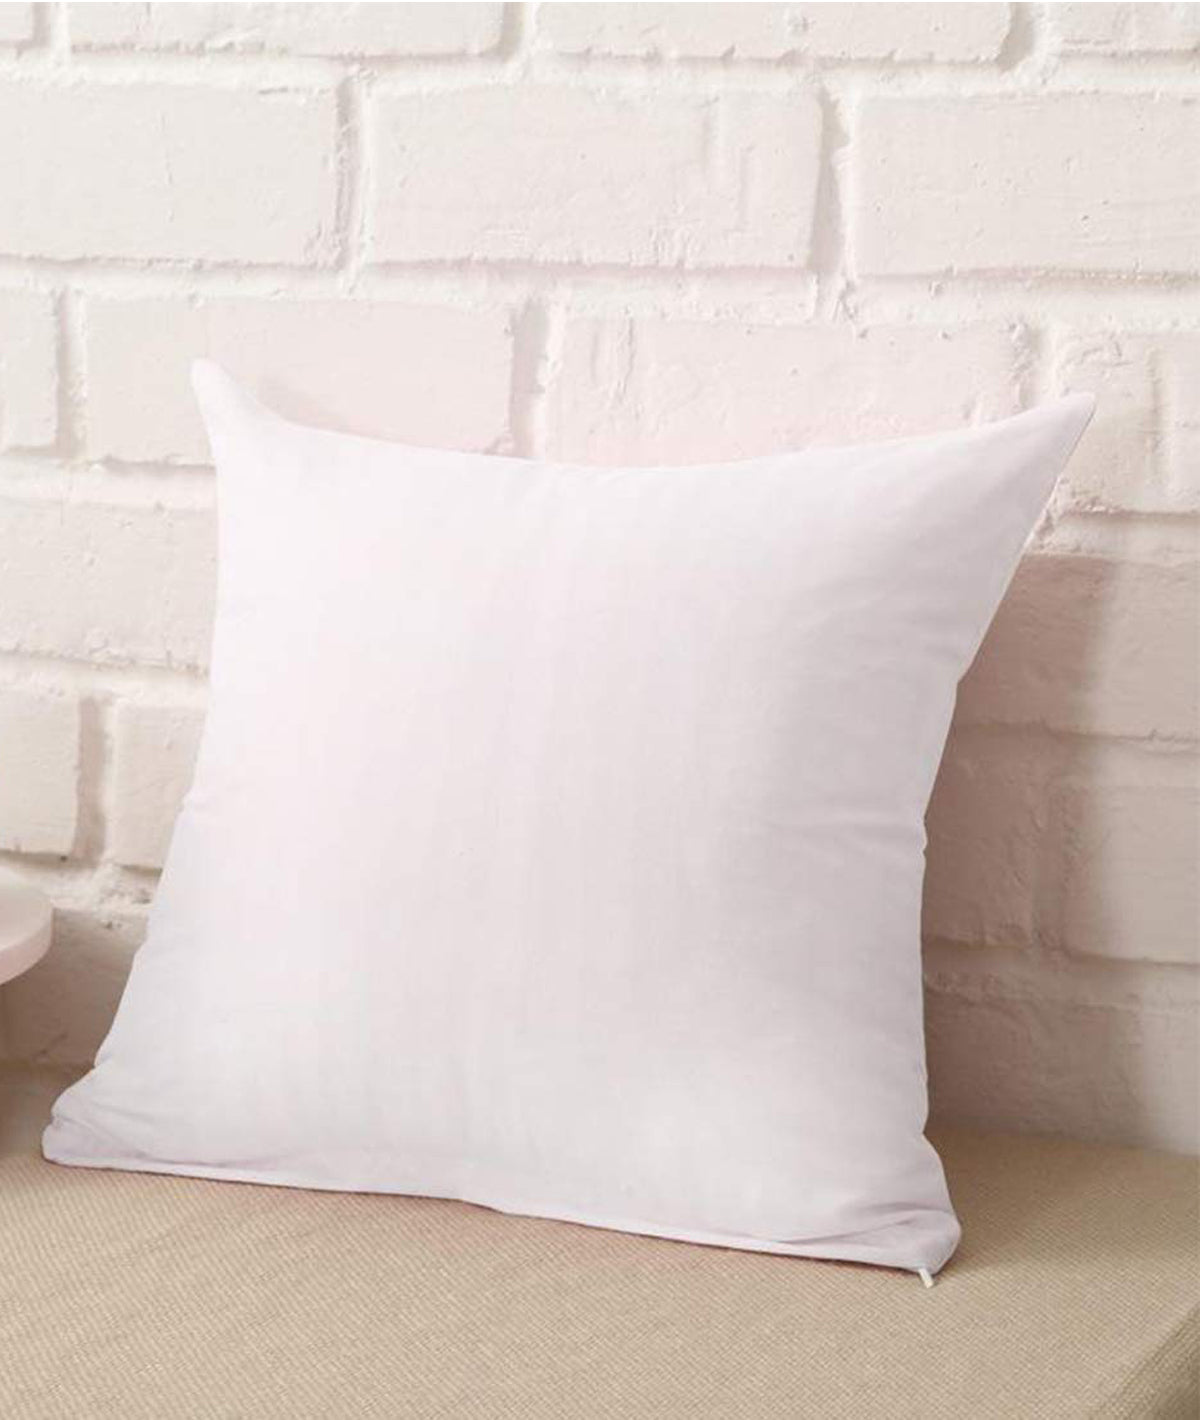 Cushion Fillers: Get Upto 10% OFF on Cushion Fillers Online